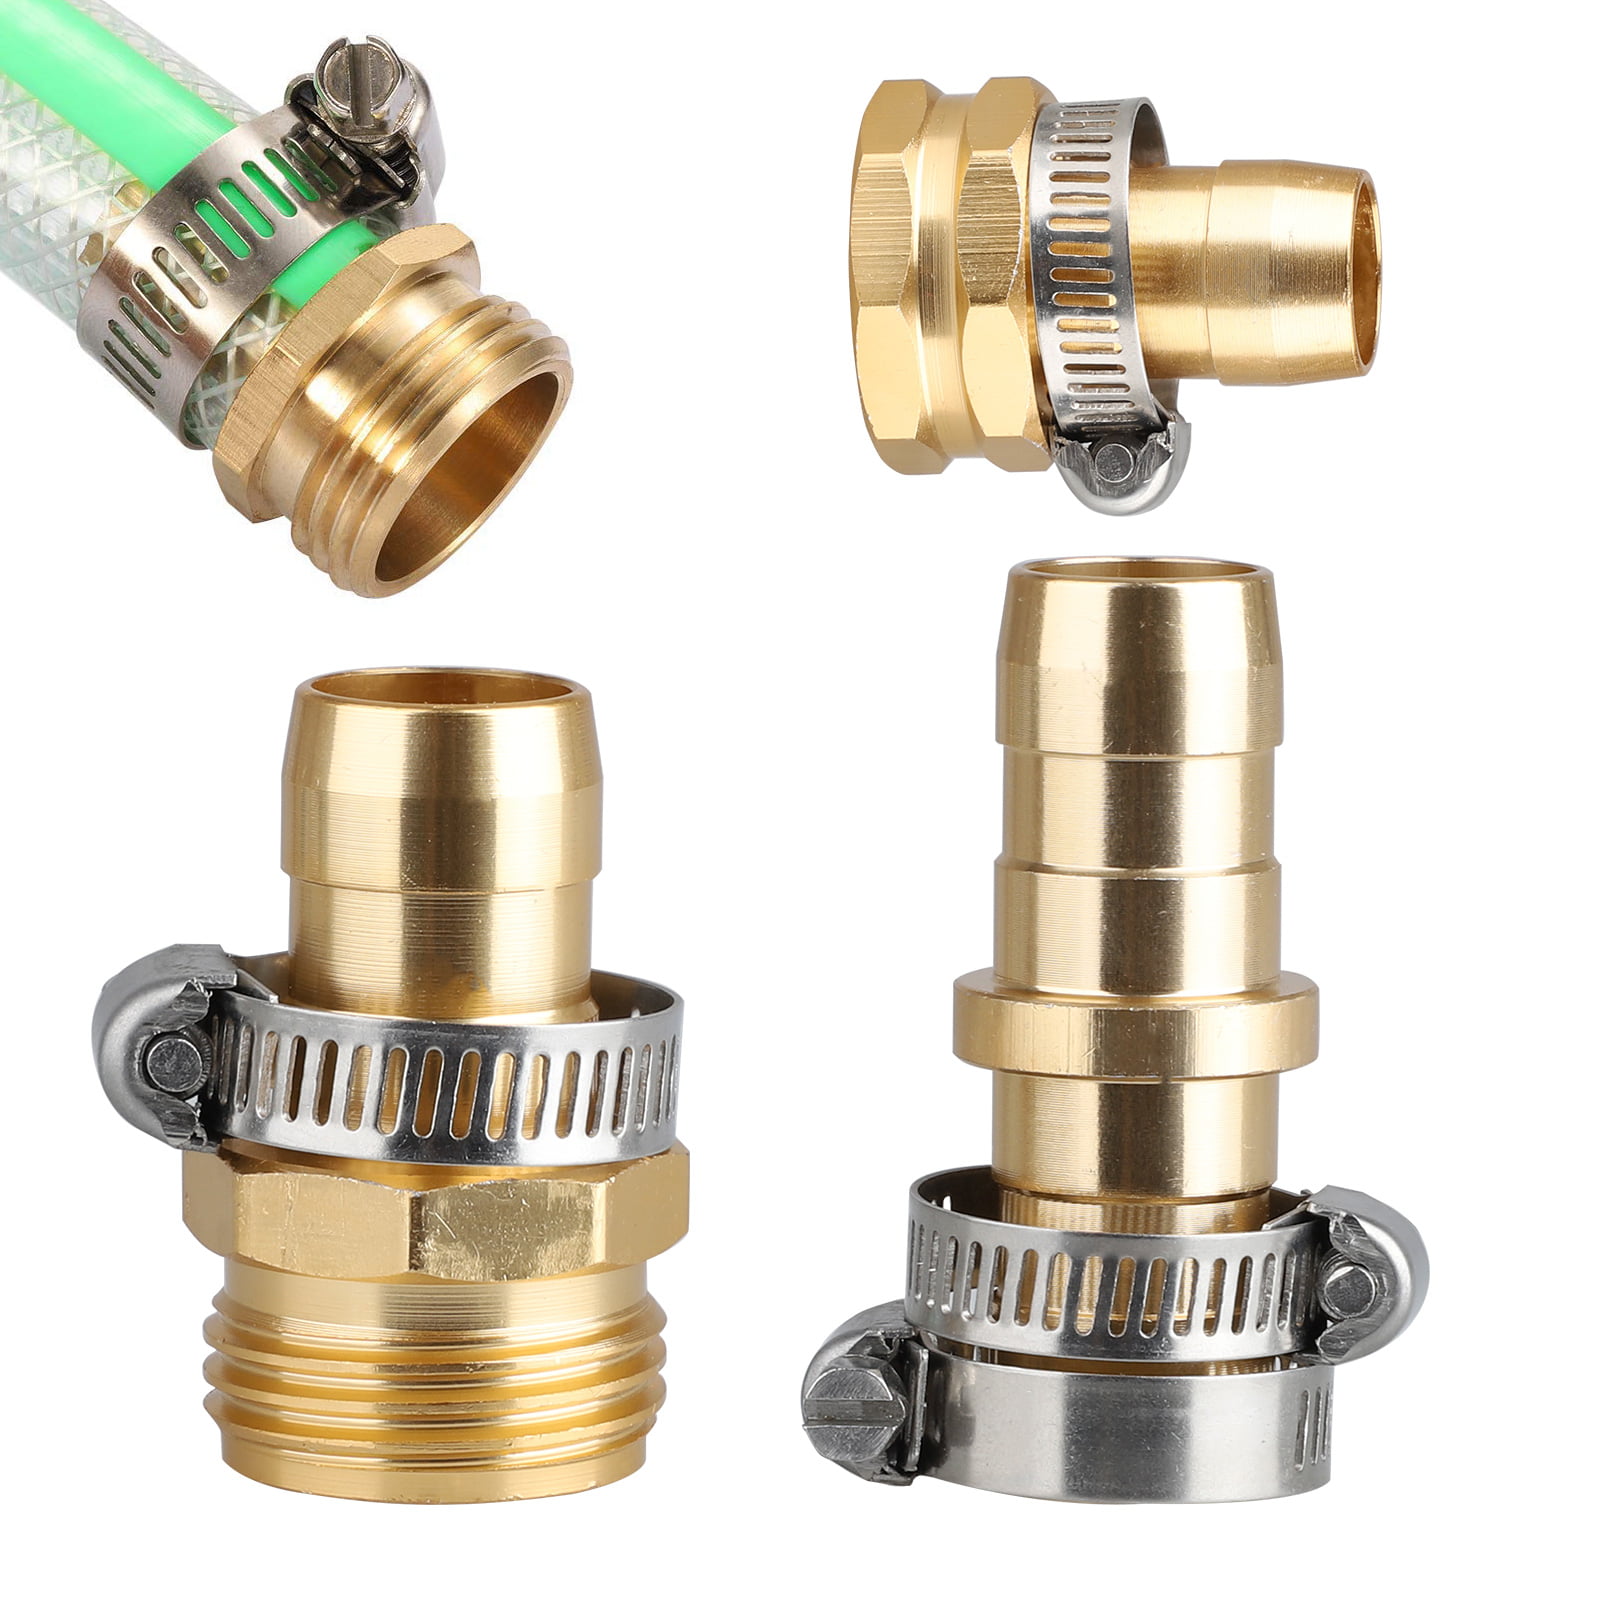 3pcs 5/8" Compatible Watering Accessories Water Hose Pipe Connector Fittings 